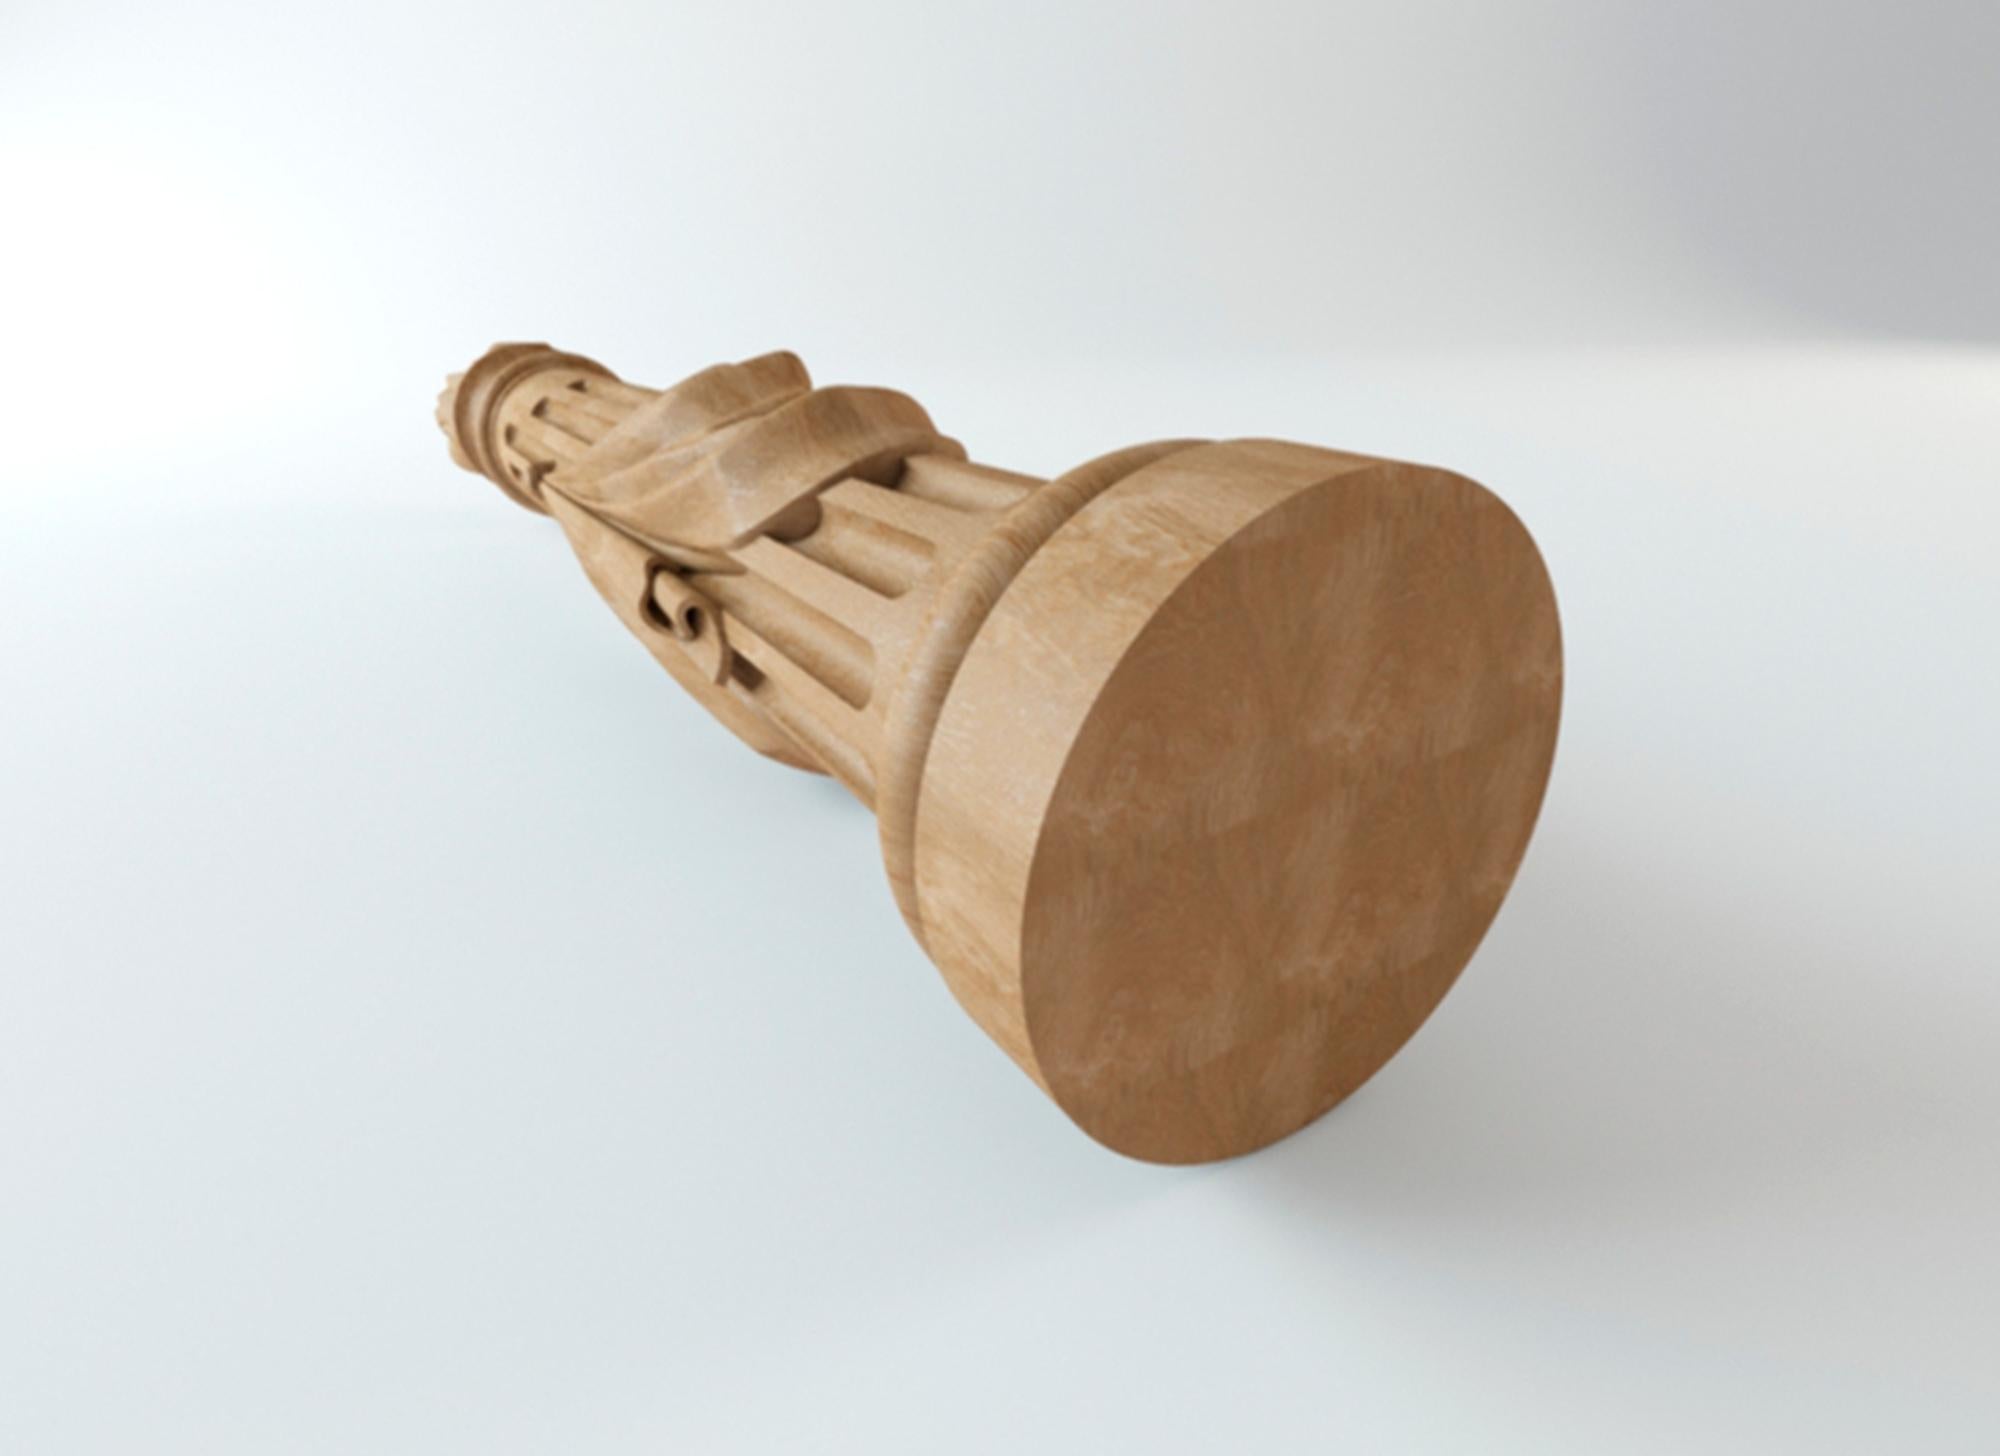 Unfinished high quality carved Newel Post from oak or beech of your choice.

>> SKU: L-068

>> Dimensions (A x B x e x f):

- 51.26